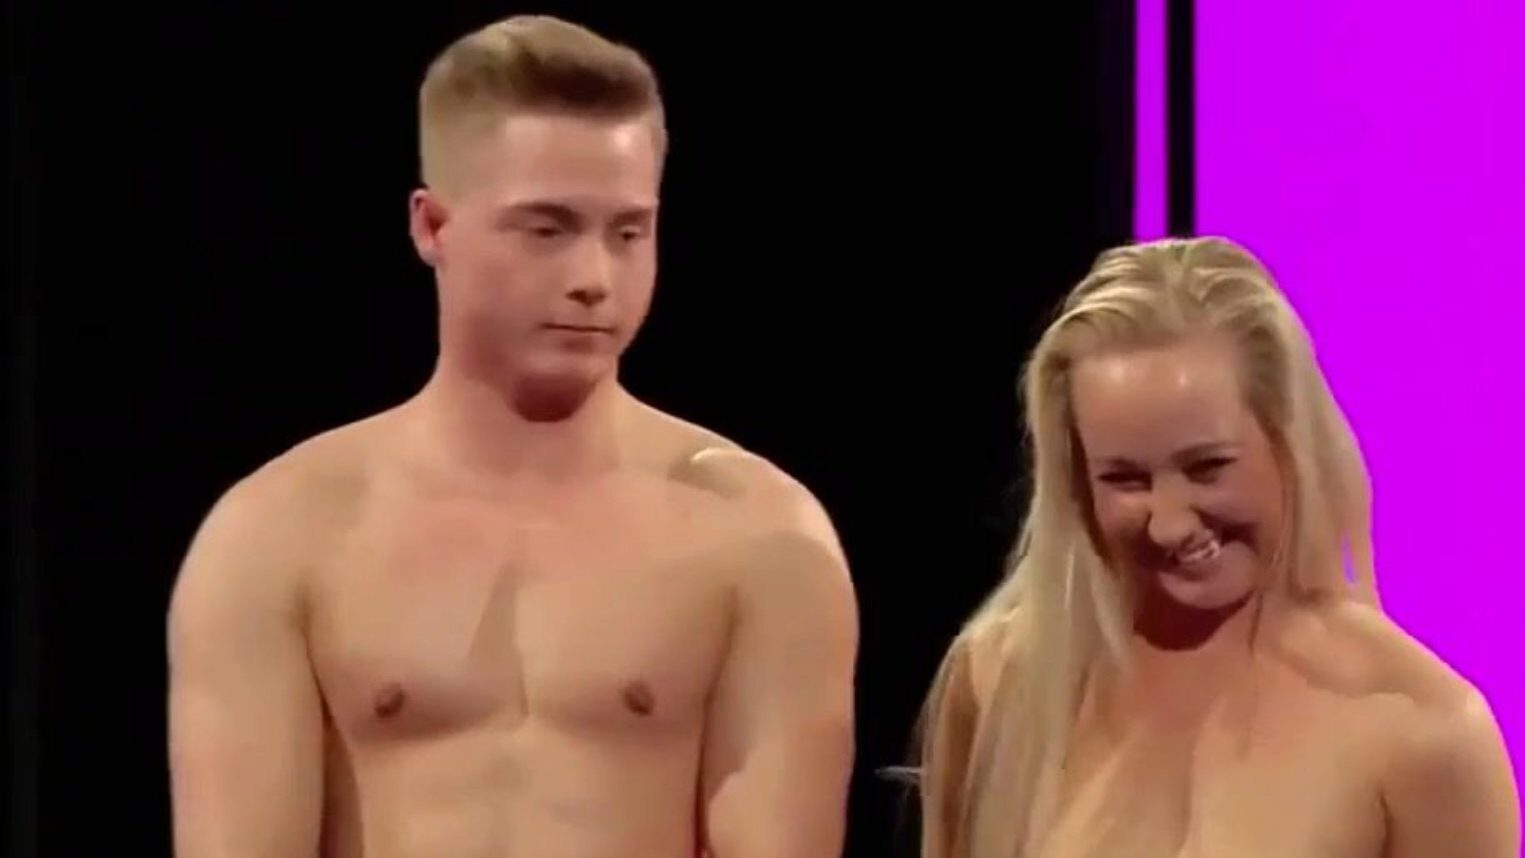 Naked Attraction - Man Tries To Hide Semi Erection (Boner Live TV Television CFNM)